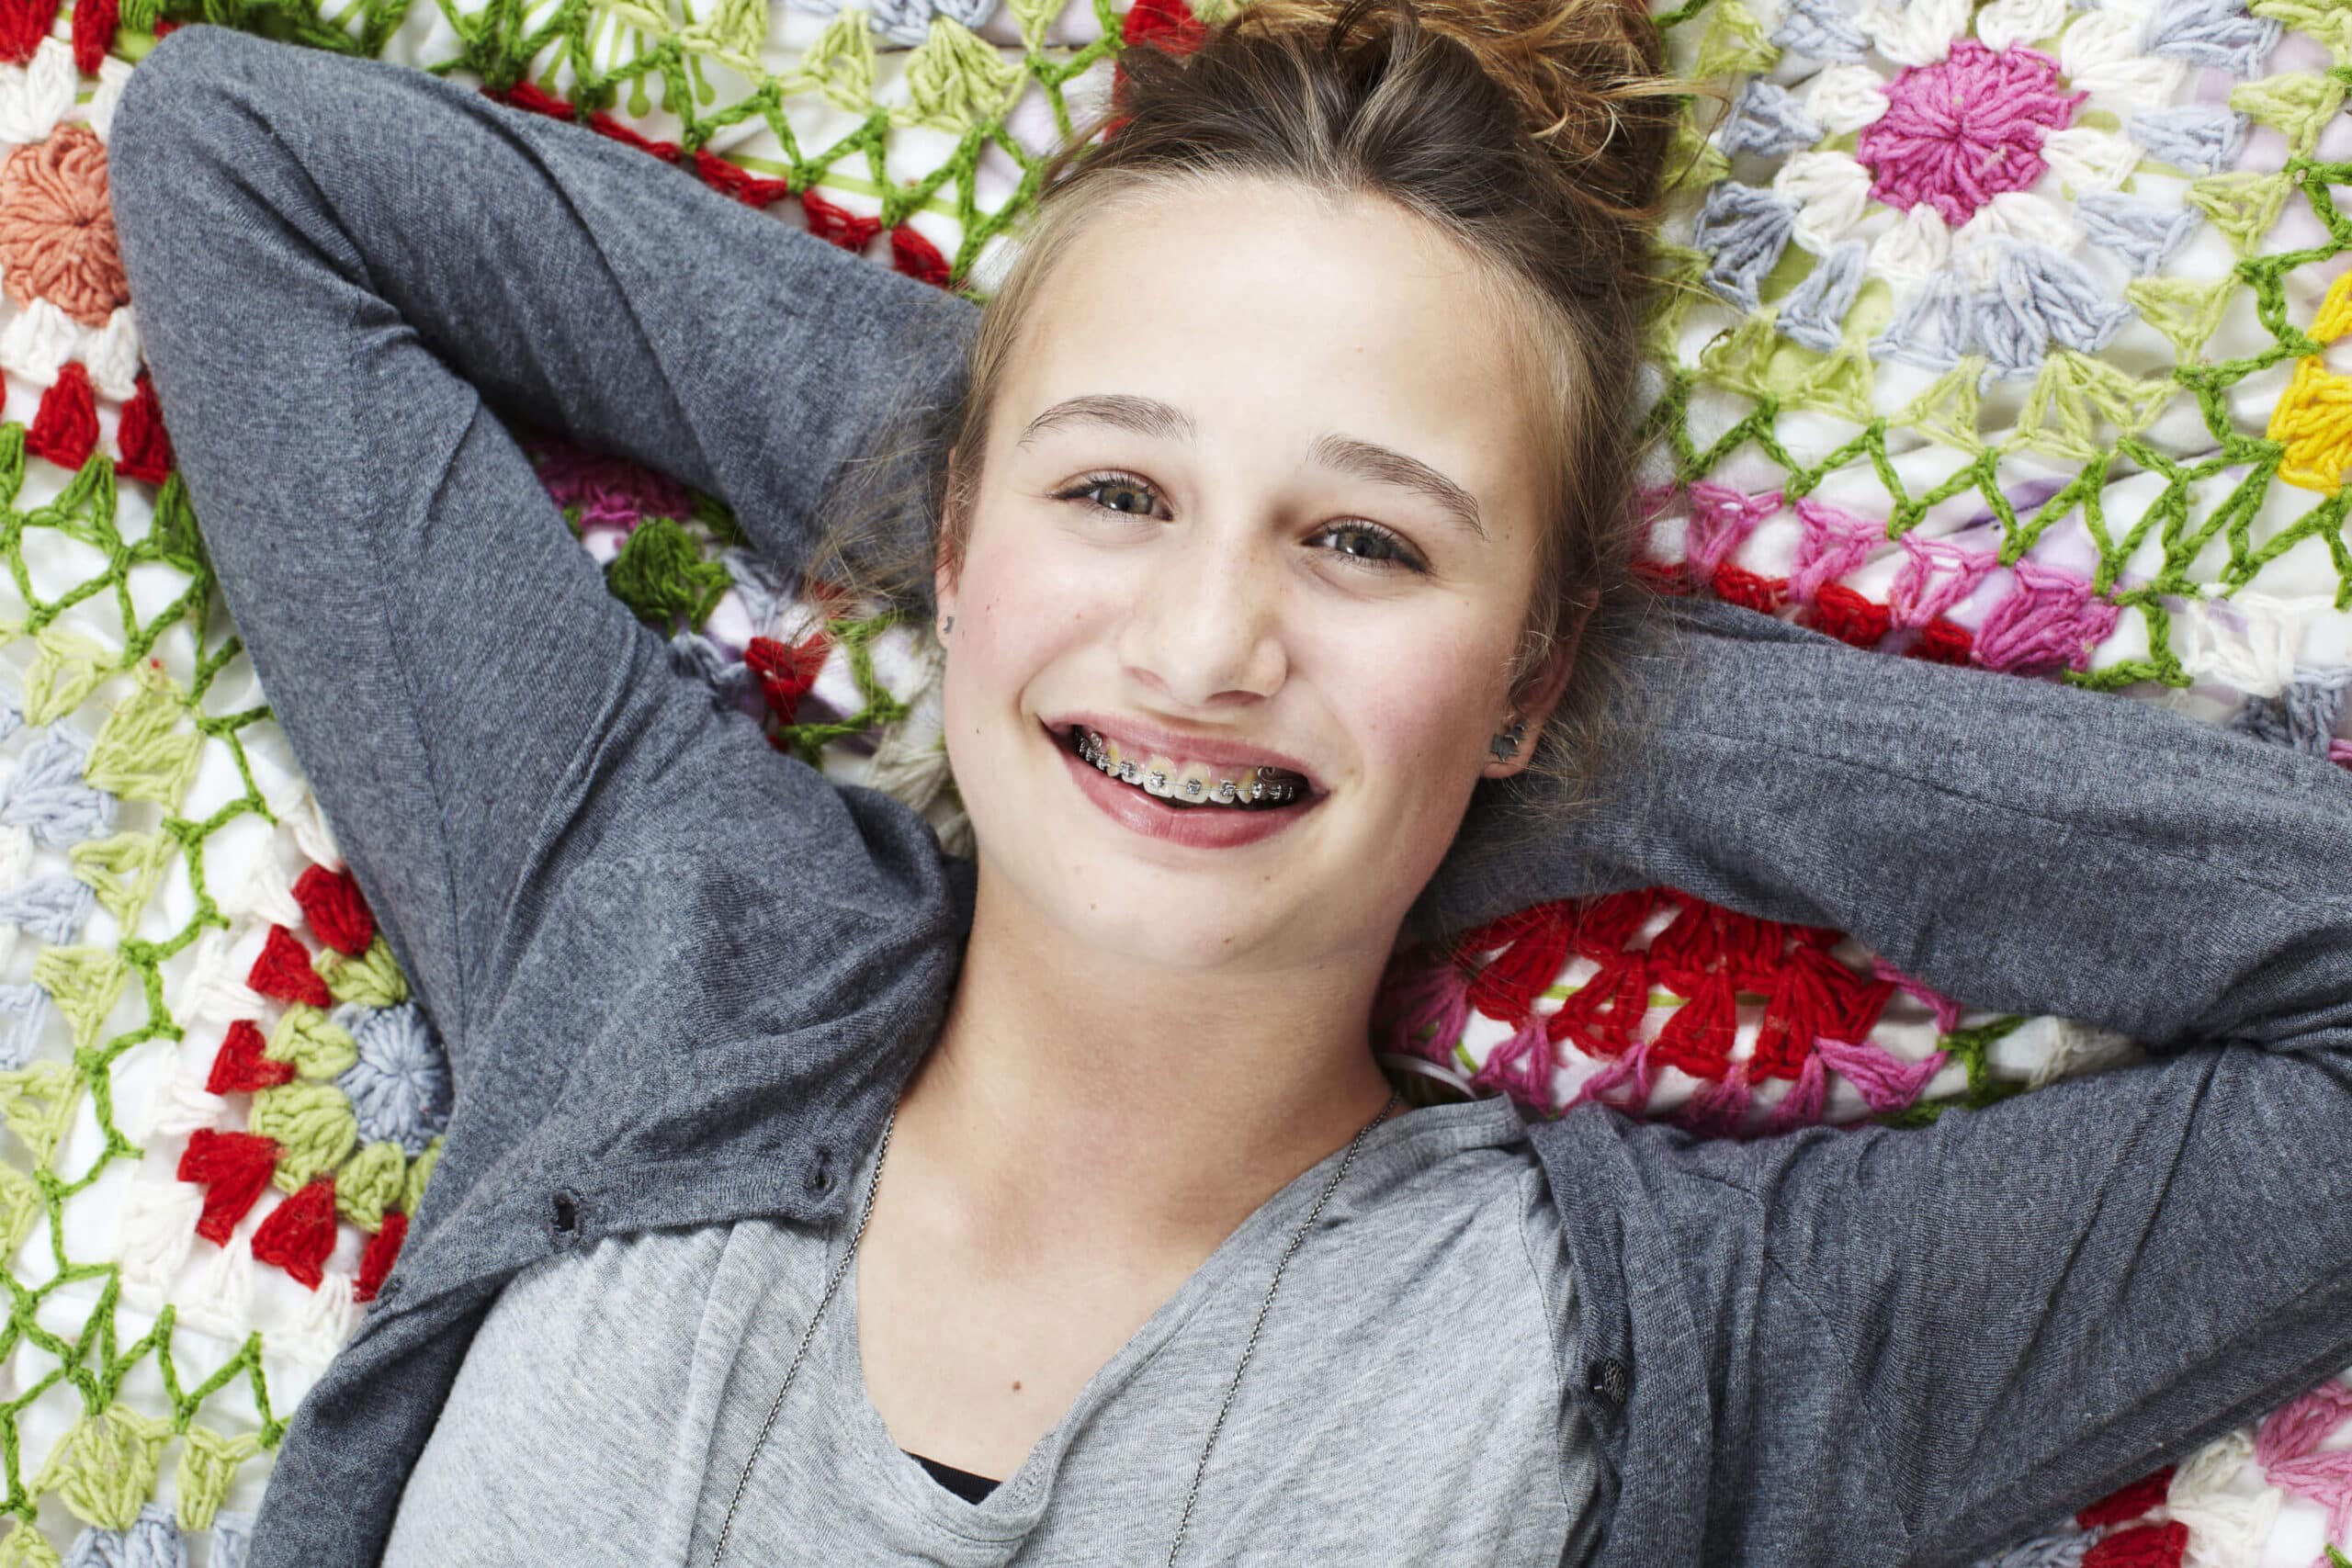 Teen girl smiling with braces